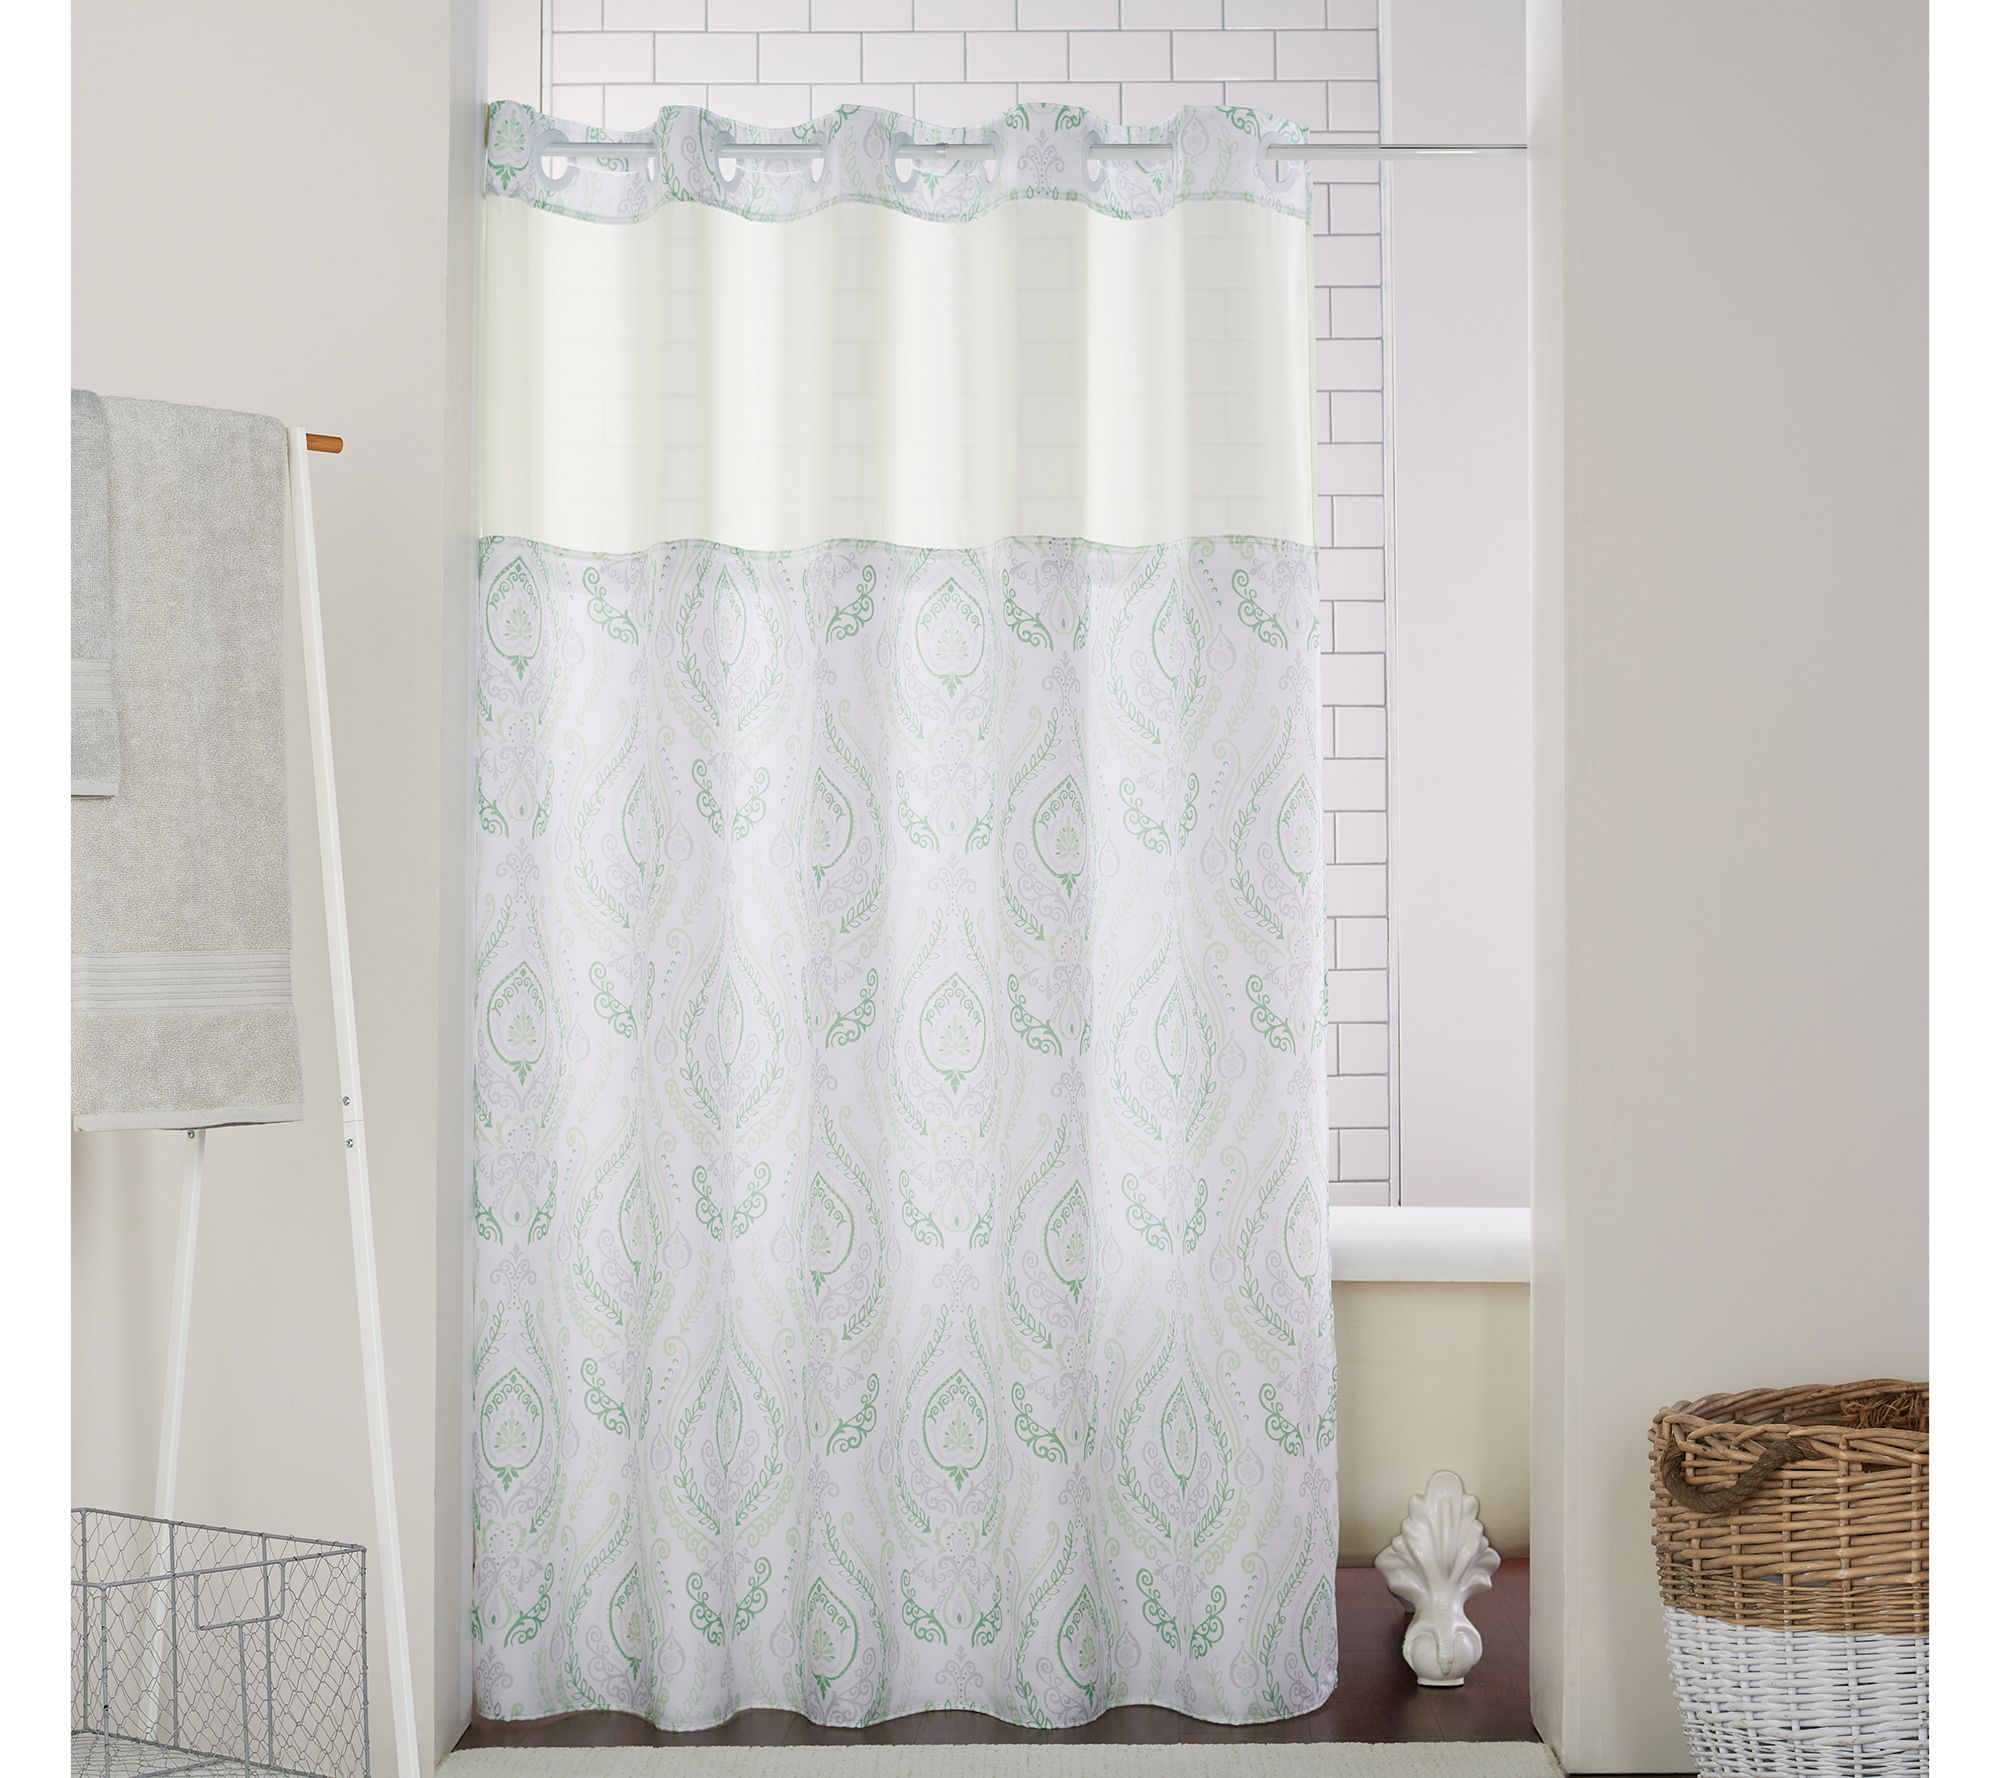 Hookless French Damask Shower Curtain, Frontgate Shower Curtain